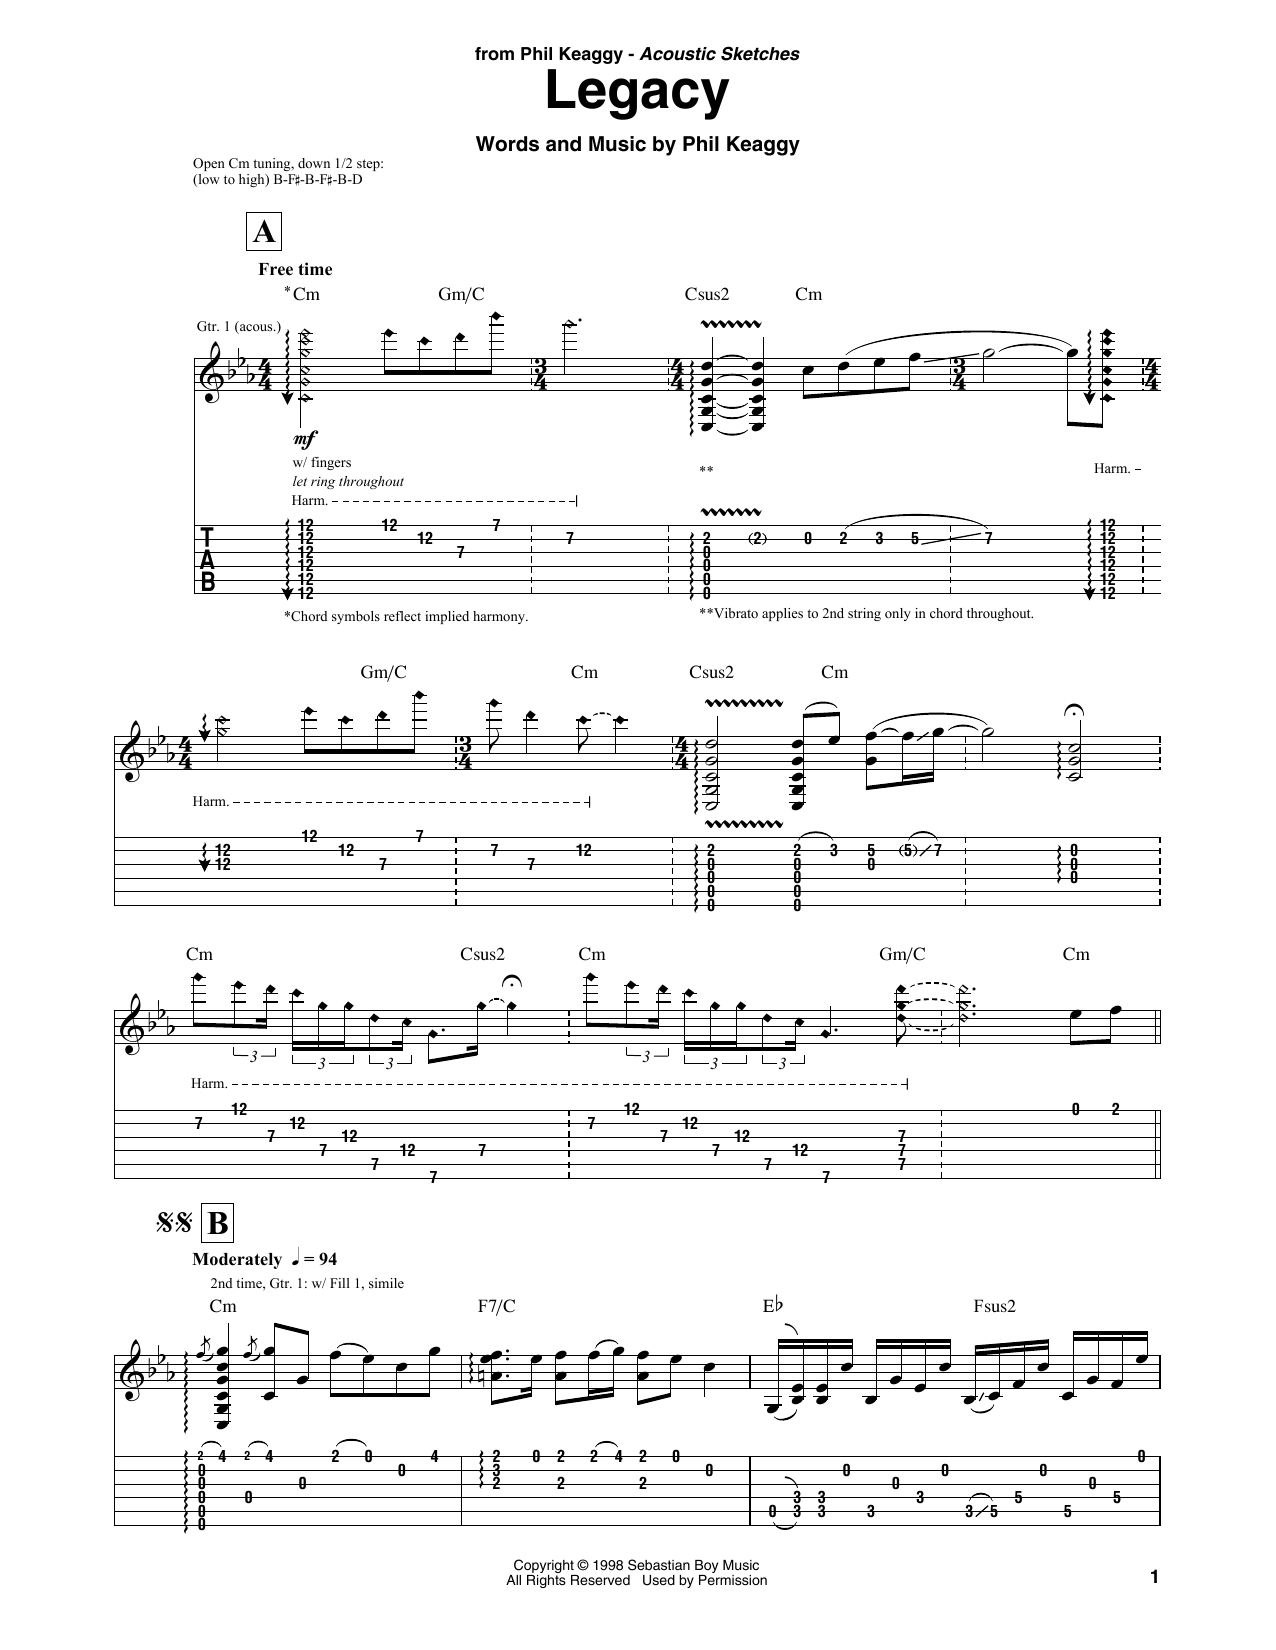 Download Phil Keaggy Legacy Sheet Music